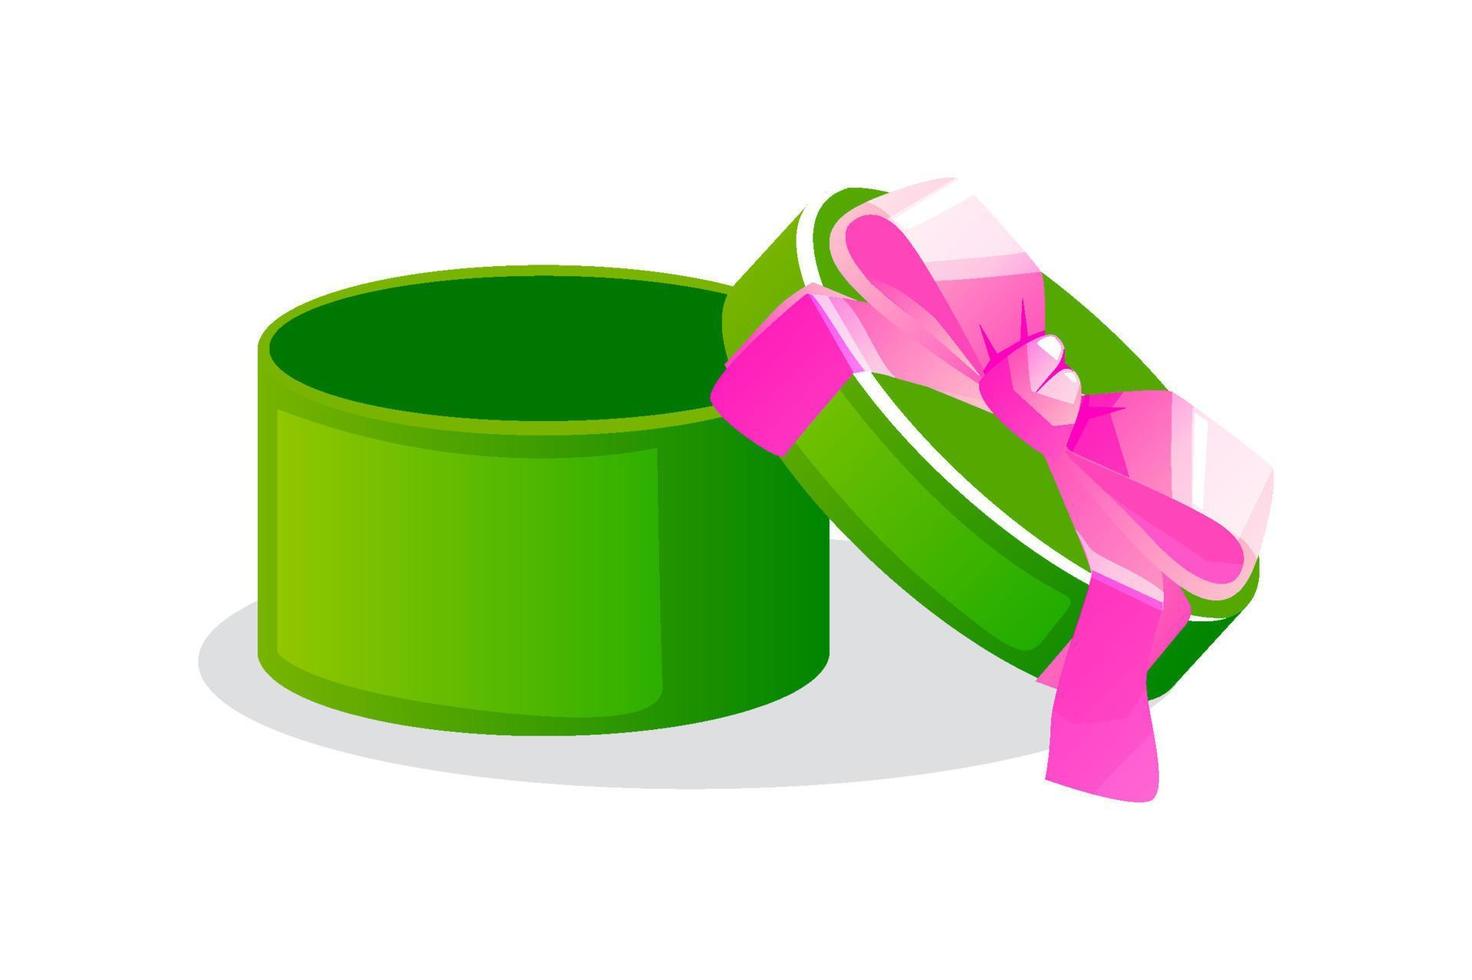 Round open green gift box with bow for games. Vector illustration empty box graphic element.